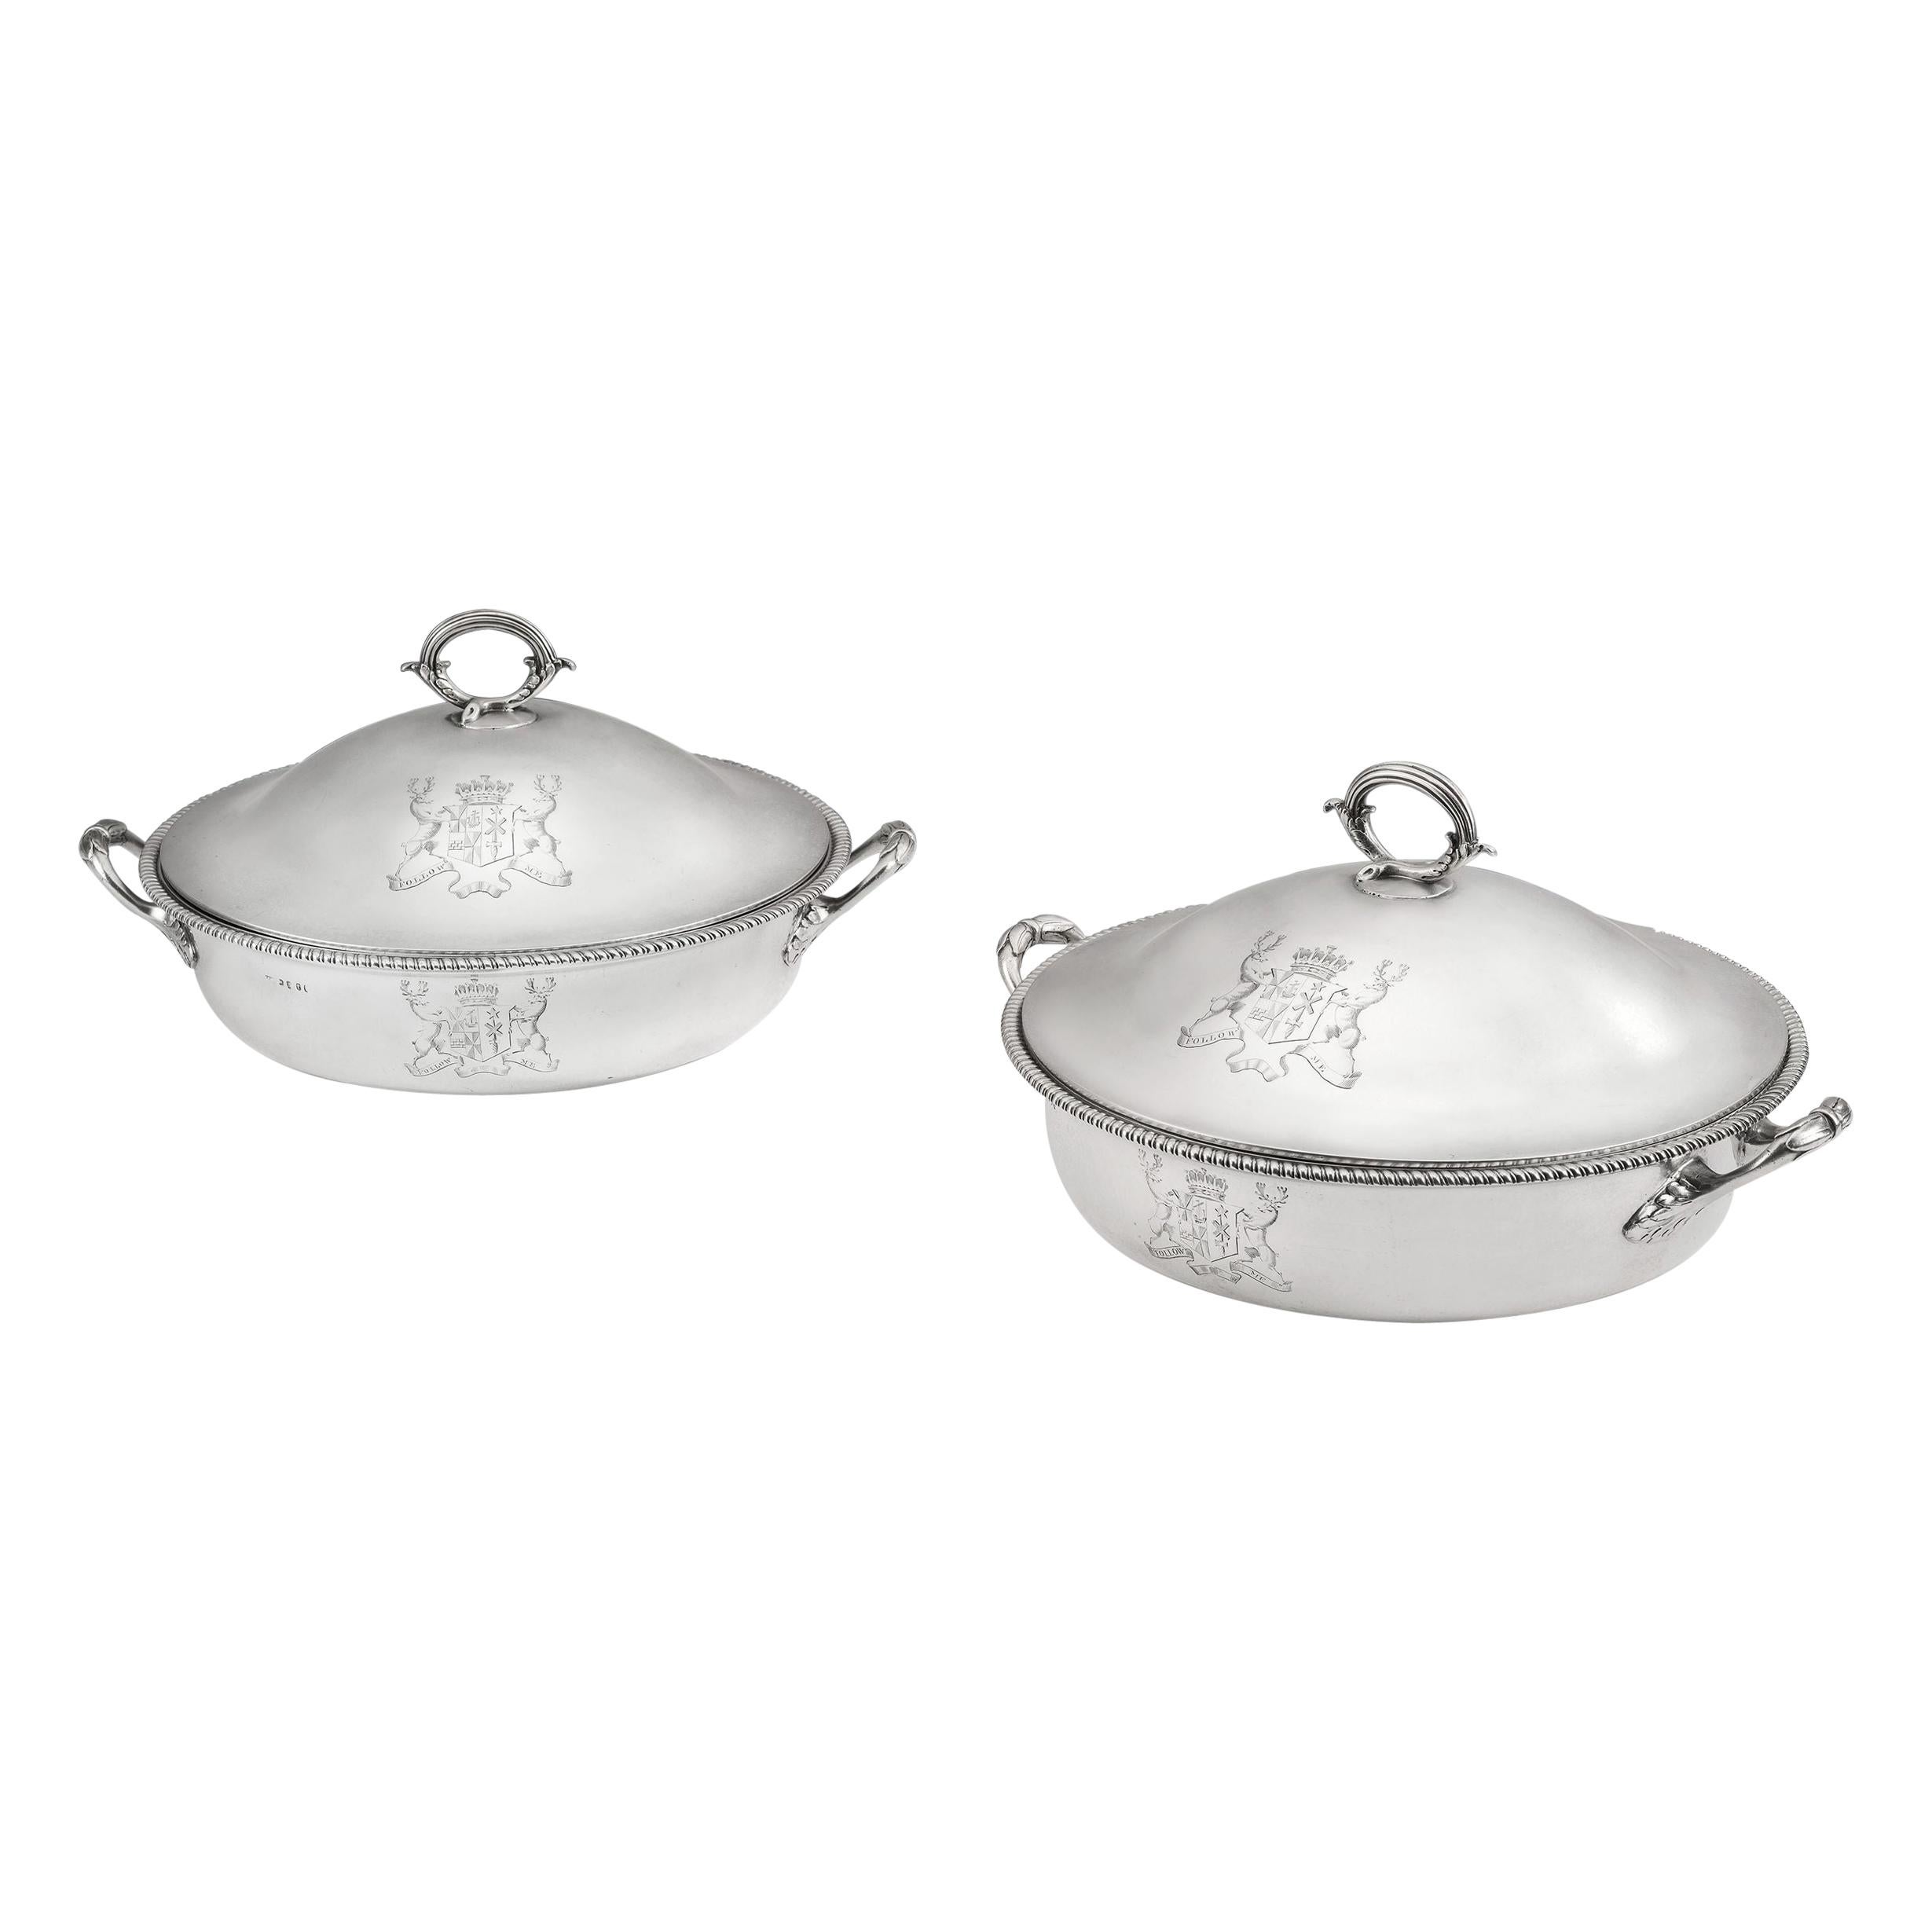 Pair of George III Serving Dishes Made in London in 1794 by Henry Green